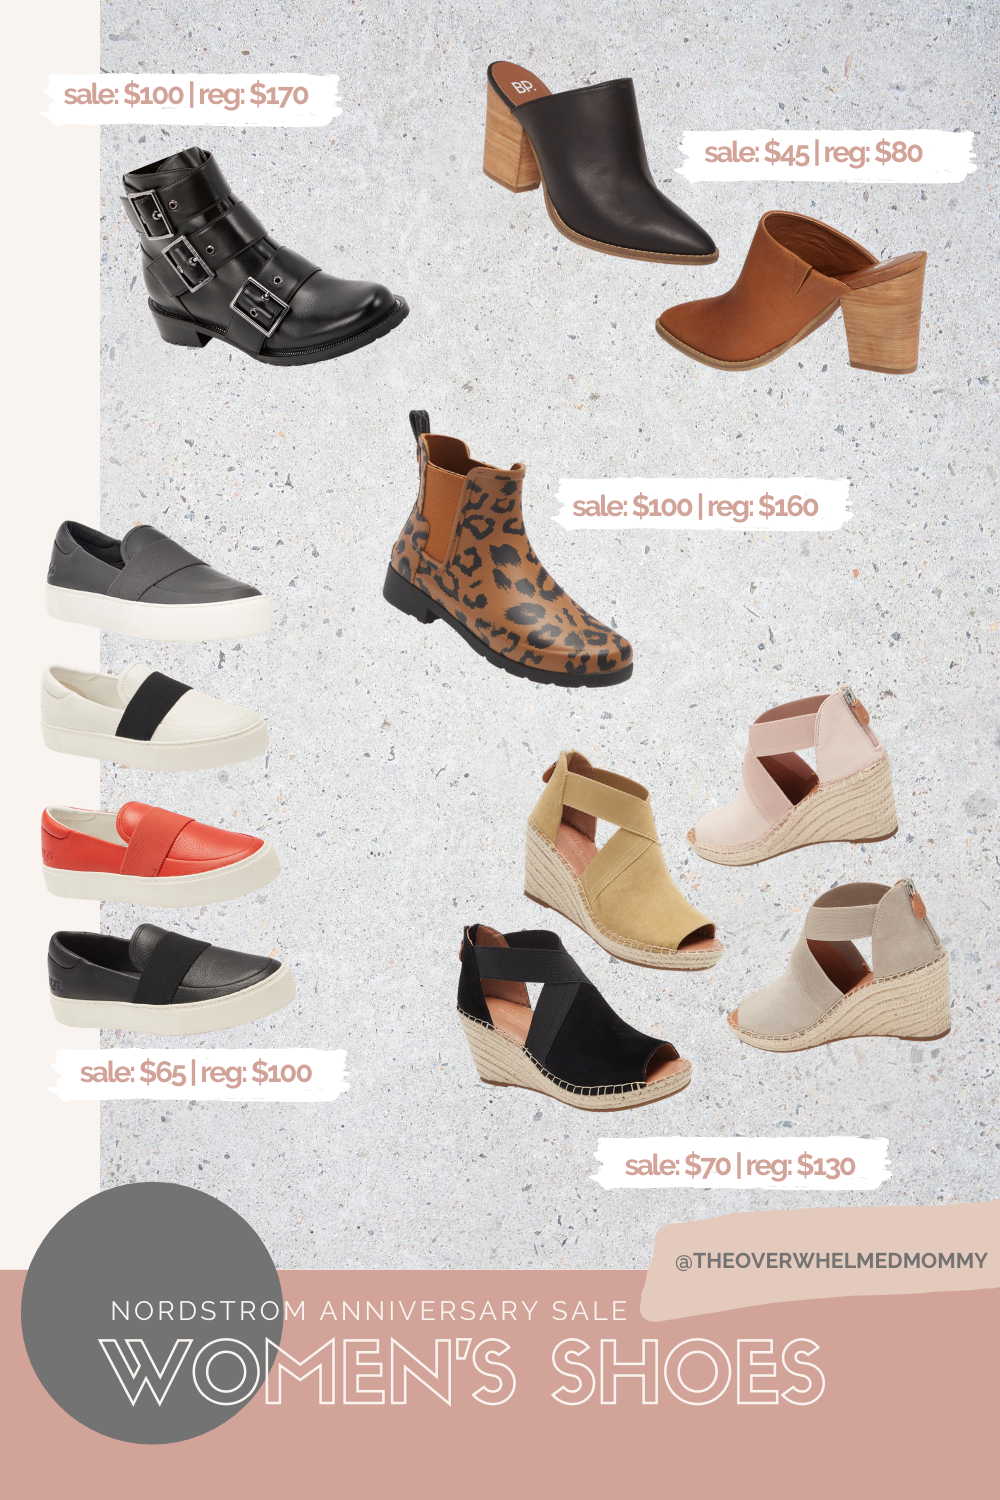 Nordstrom Anniversary Sale 2020 Deal Round-Ups — The Overwhelmed Mommy Blog